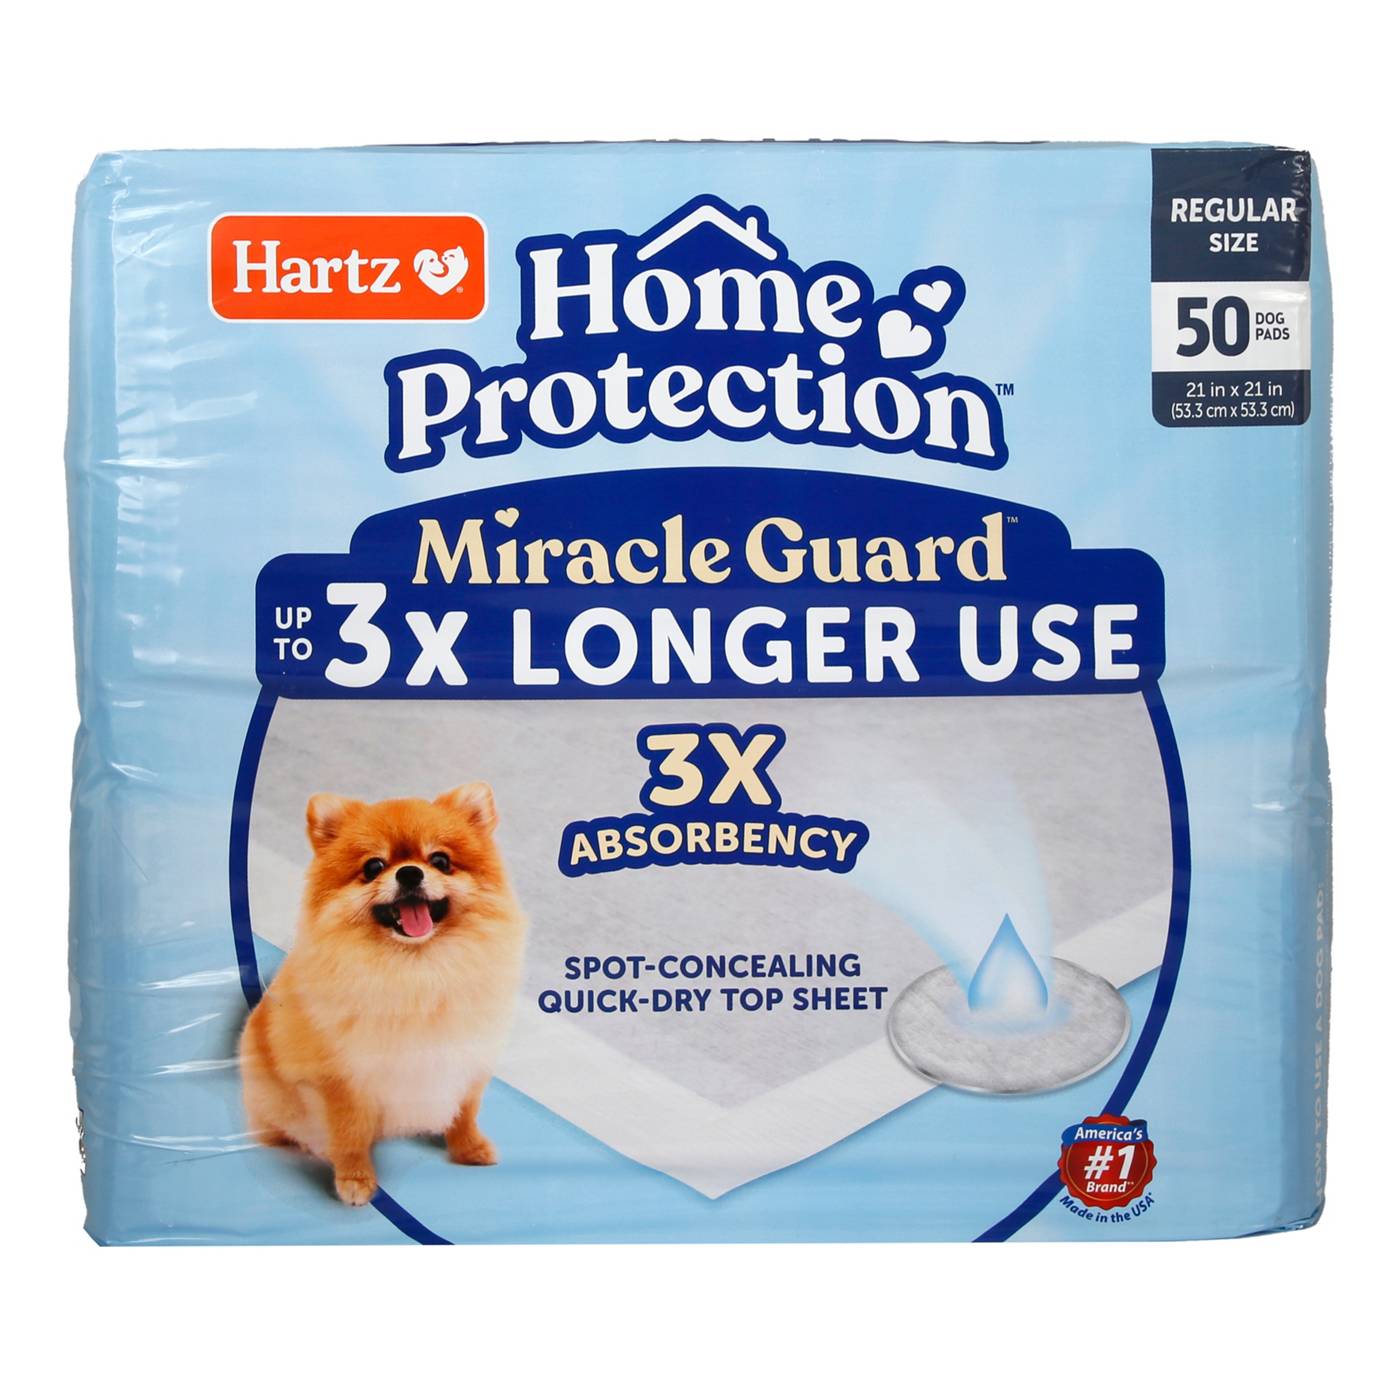 Hartz Home Protection Miracle Guard Regular Size Dog Pads; image 1 of 2